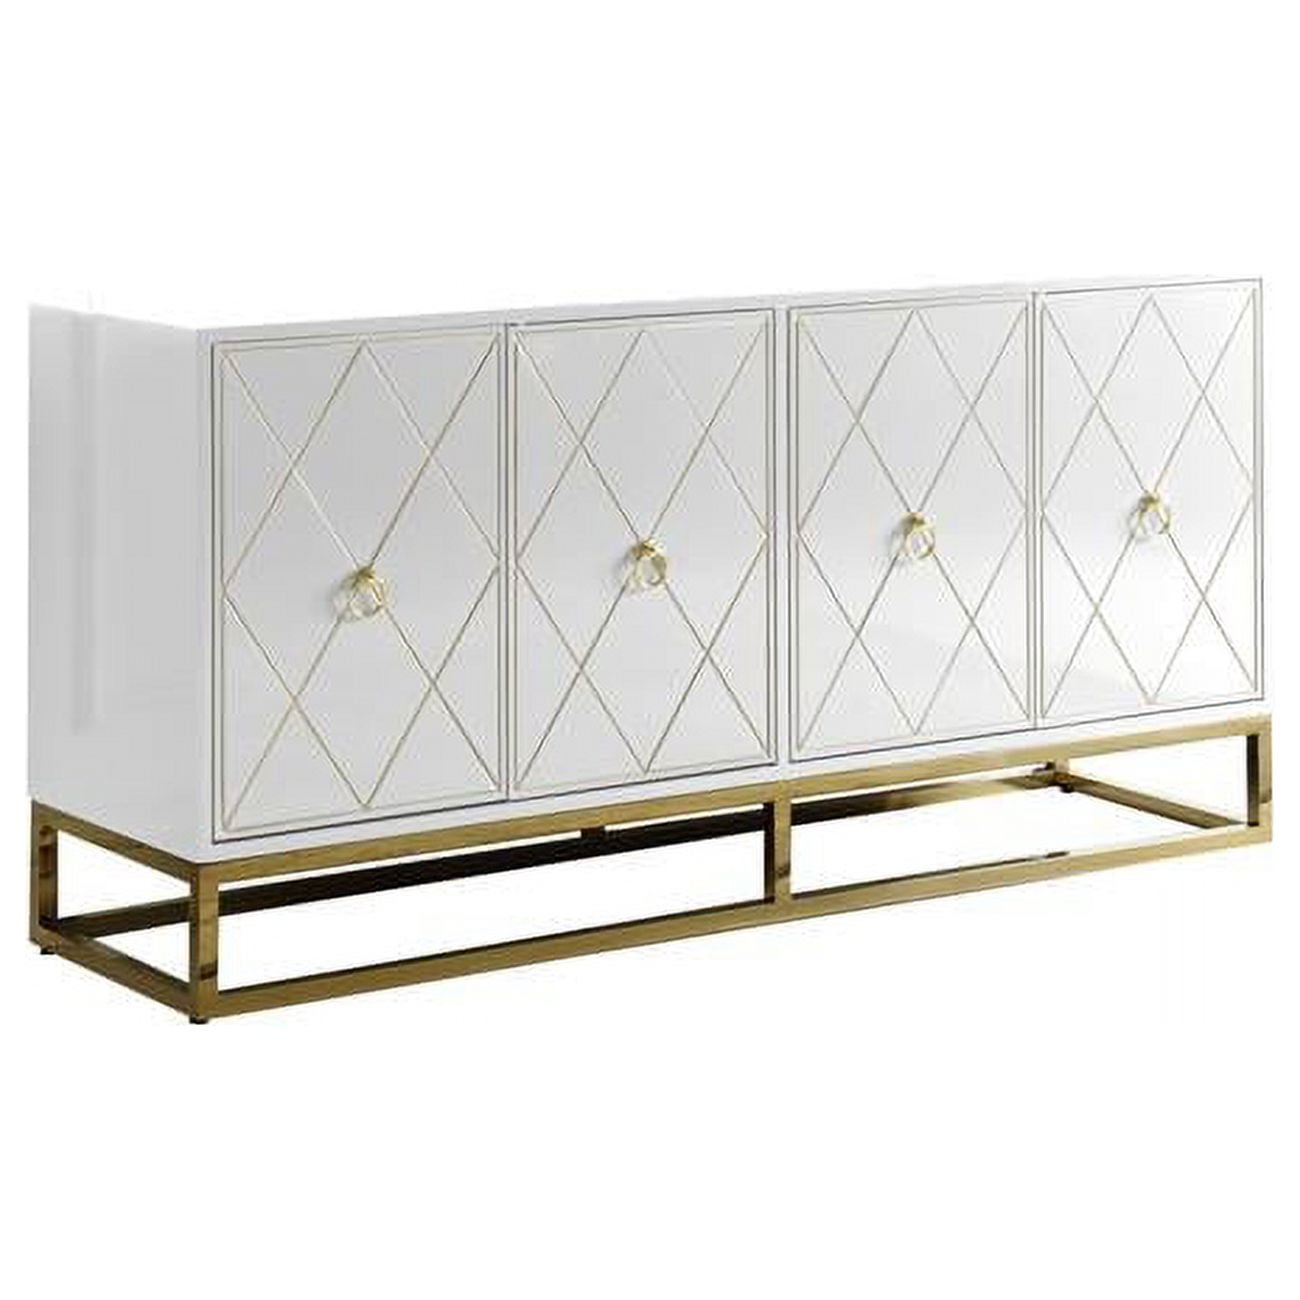 Picture of Best Master Furniture T1943 White Sideboard Senior White Lacquer With Gold Plated Sideboard